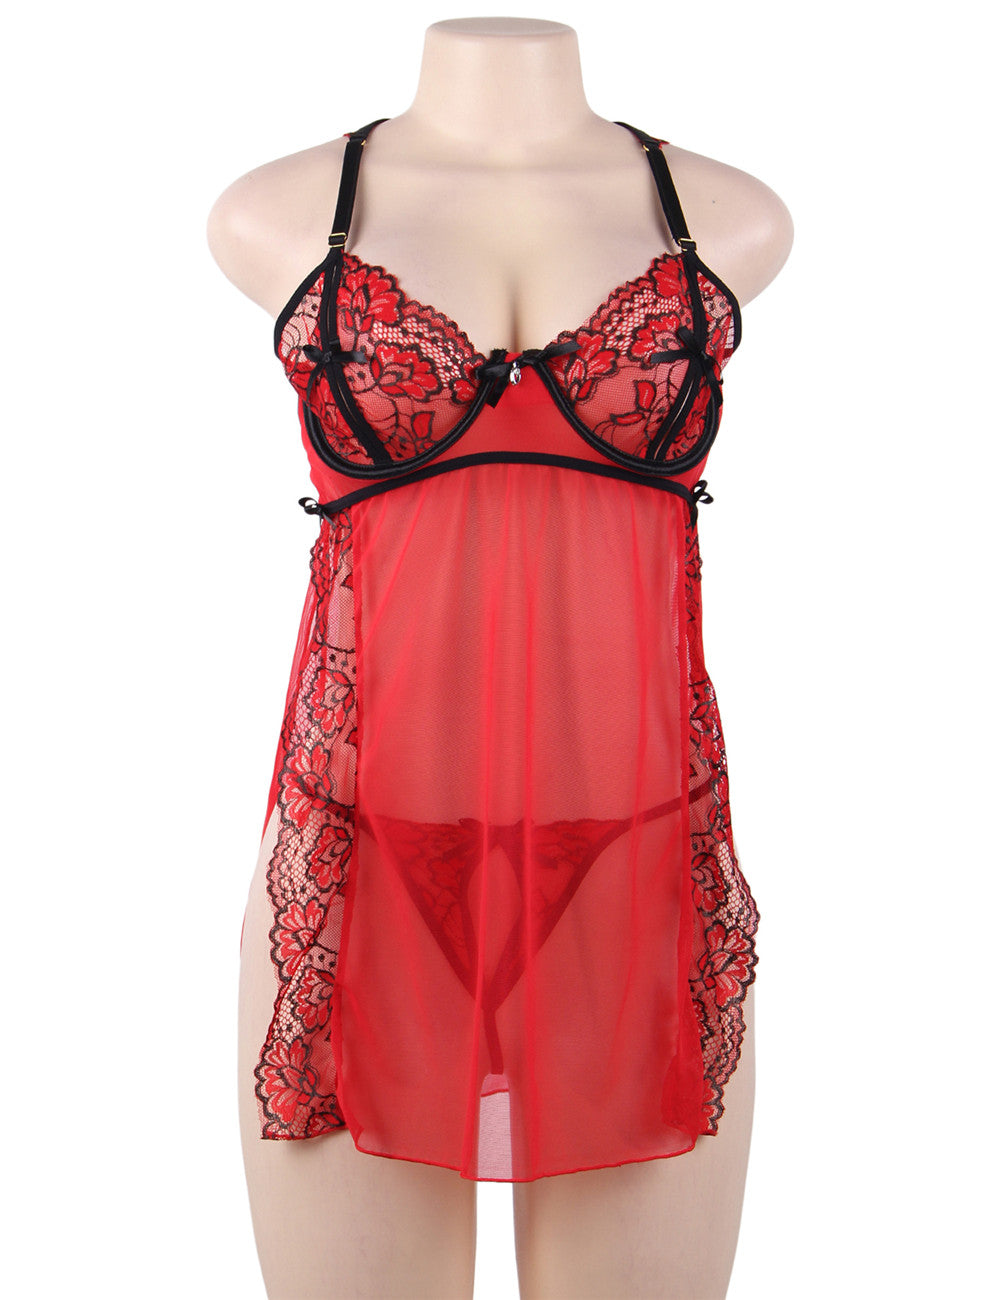 Plus Size Elegant Passion Red Sheer Mesh Open Cup Sexy Babydoll